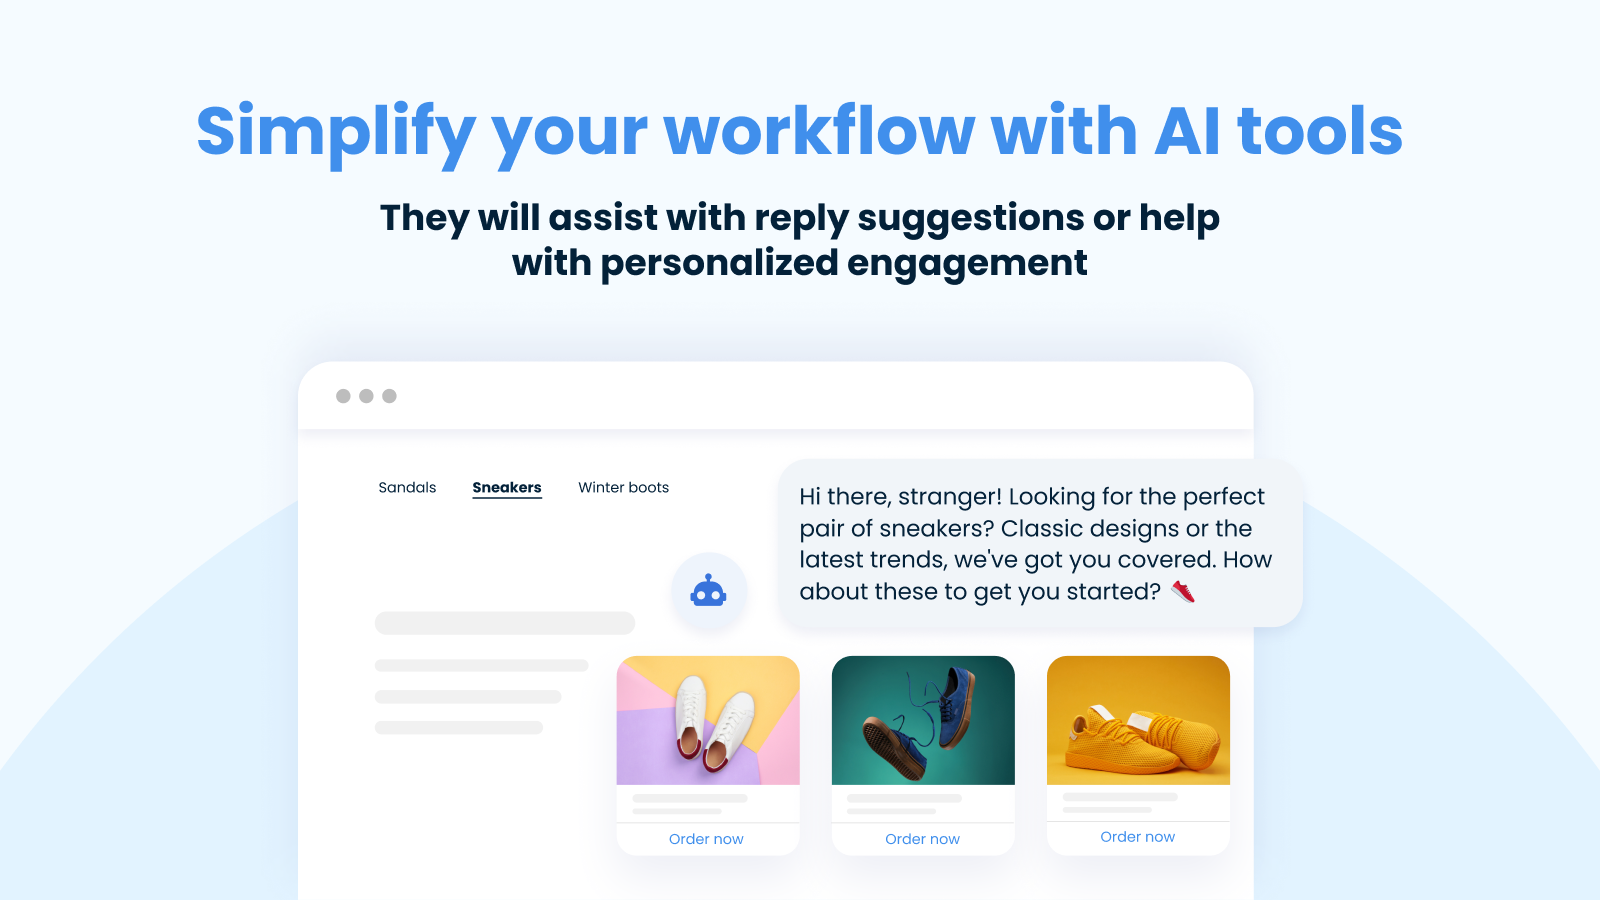 Simplify your workflow with AI tools.